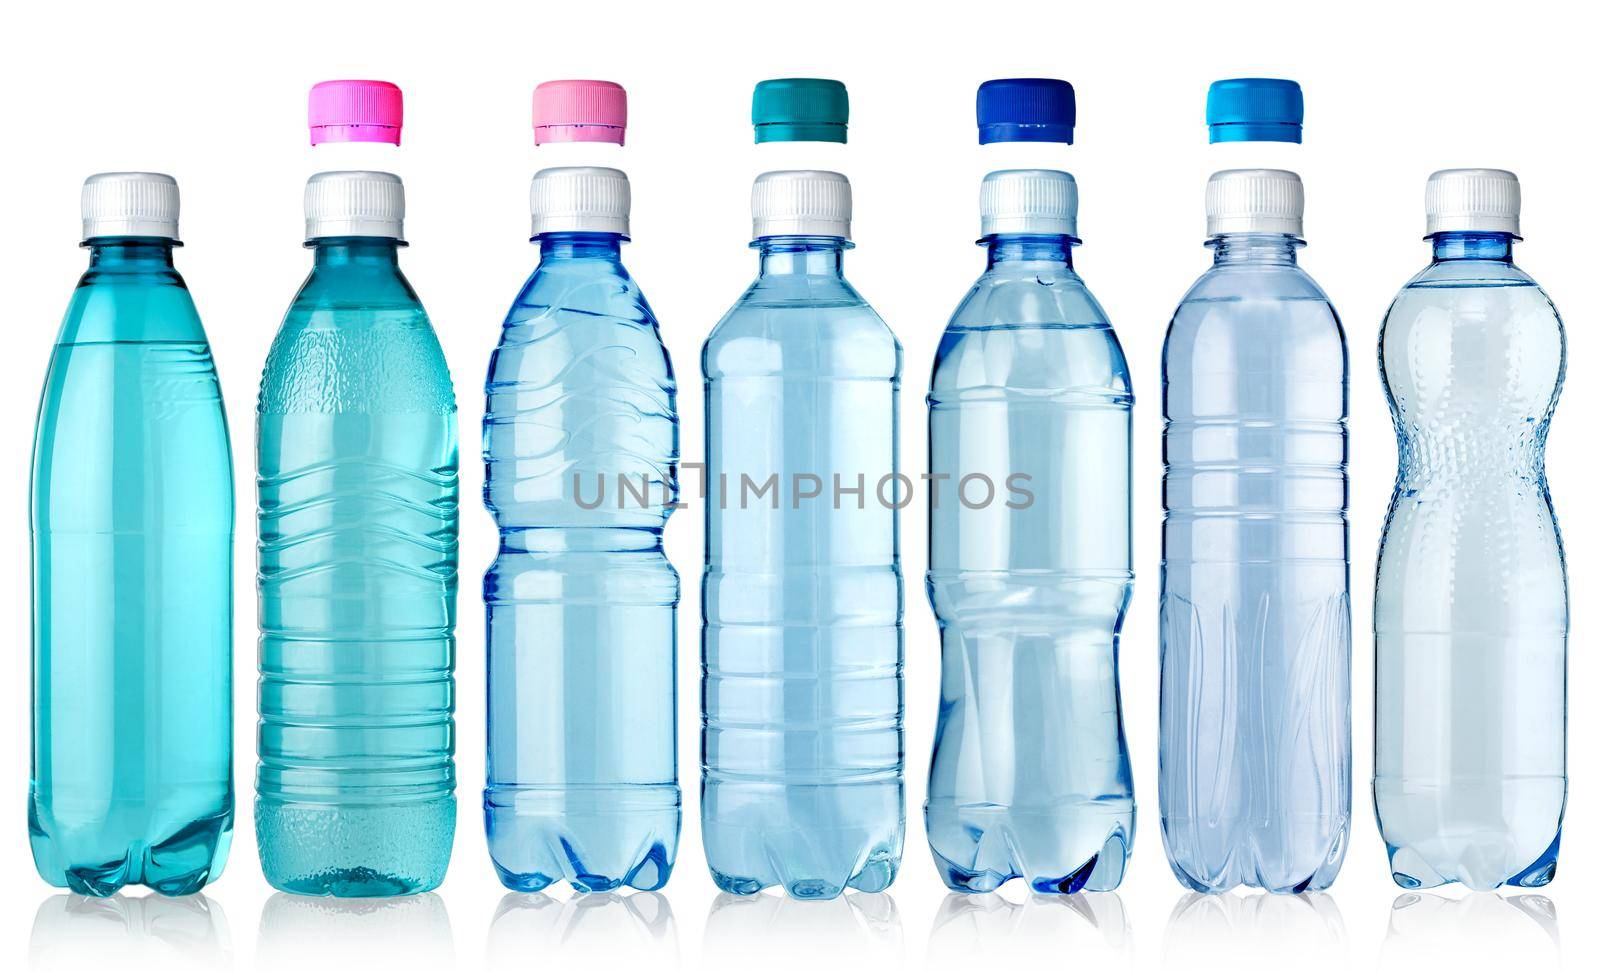  set of seven bottles of water isolated on white background with a different set of covers